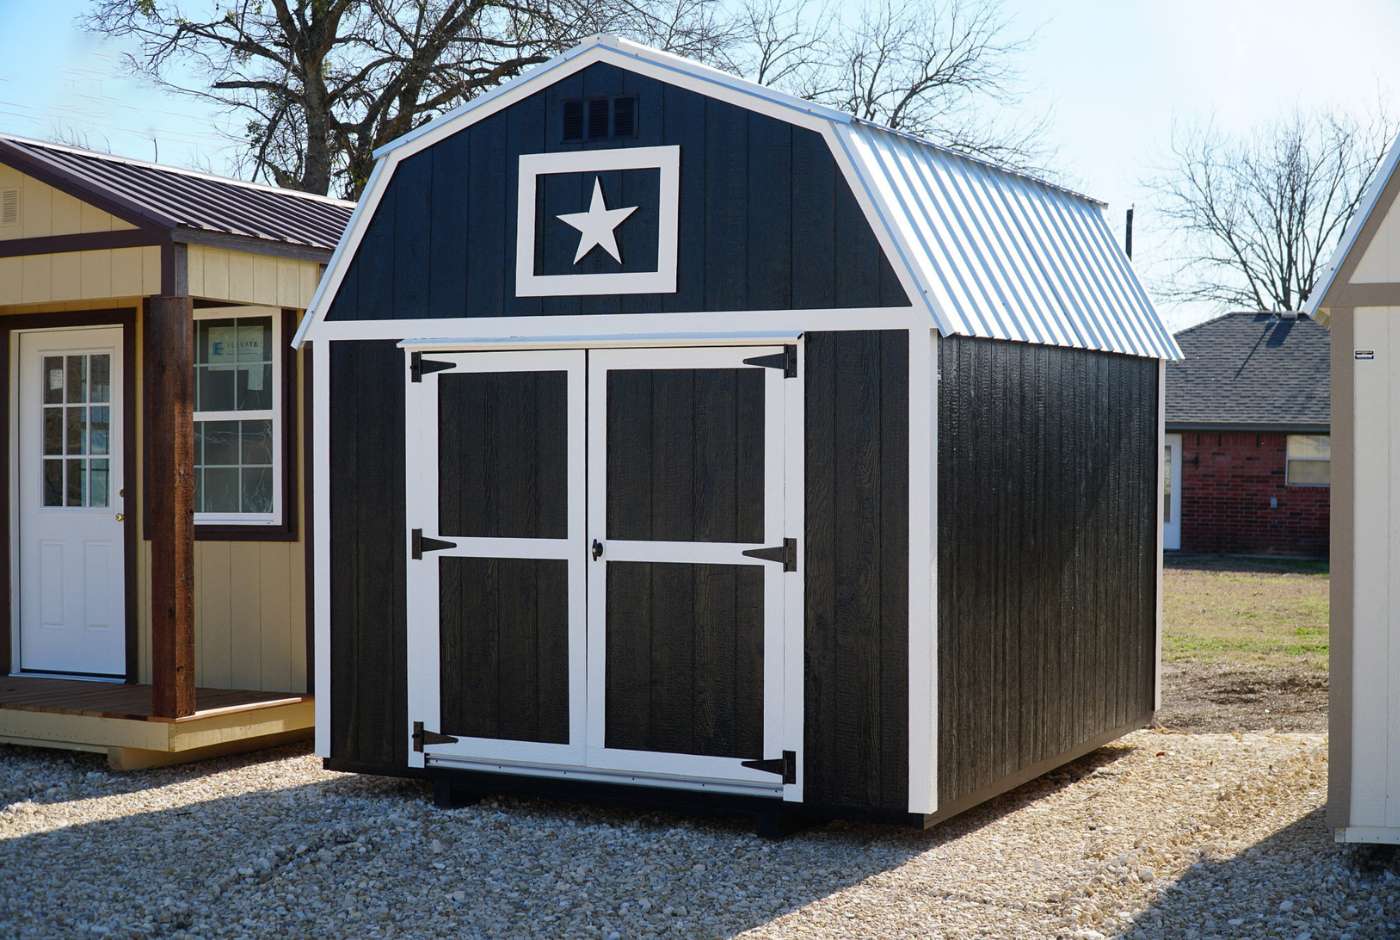 Farm and Yard Central Texas Lelands Painted Sheds Lofted Barn, Tiny Home Shell, Home Office, Home Gym, She Shed, Man Cave